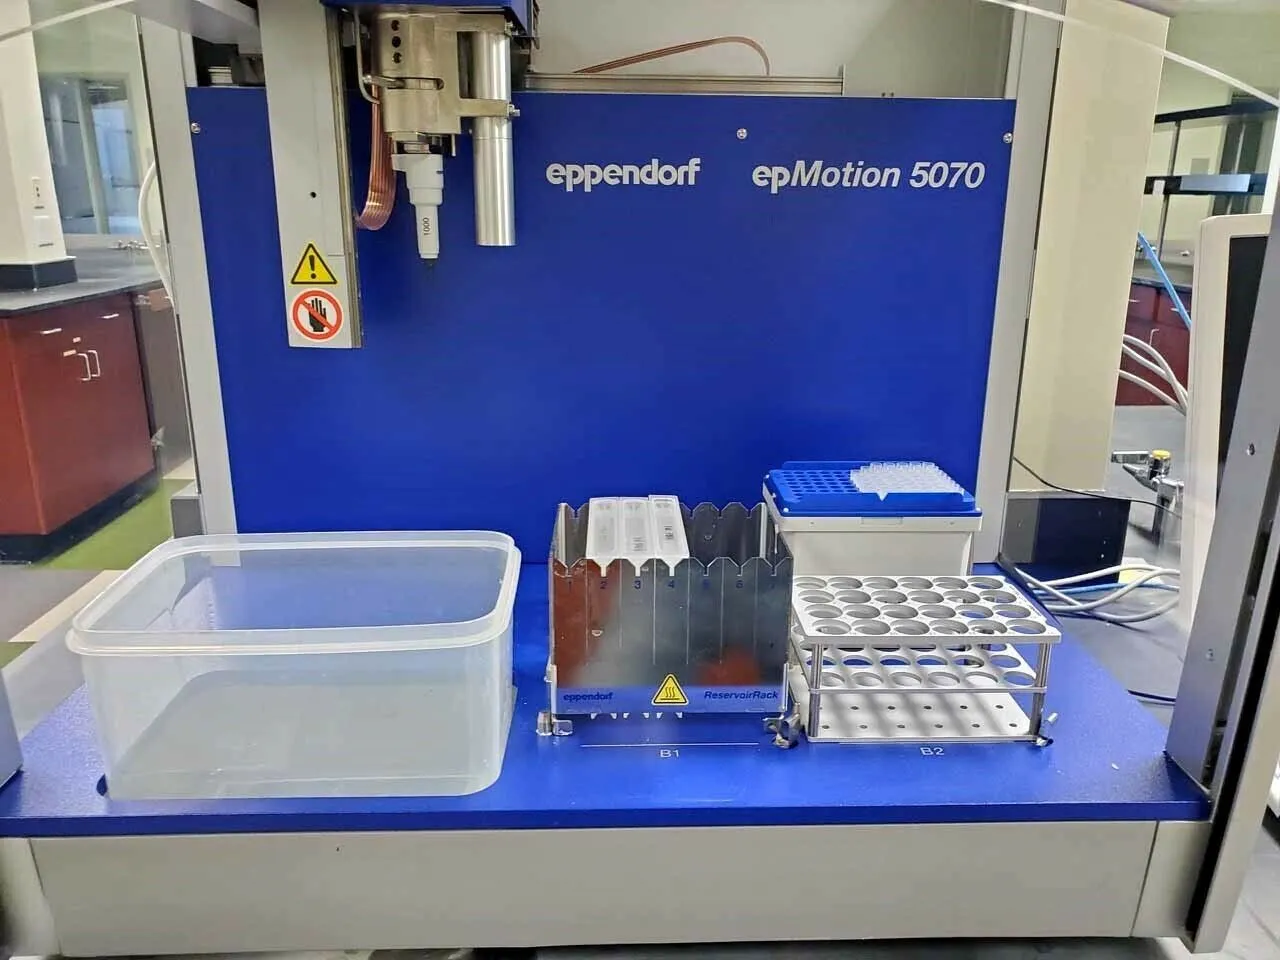 EXCELLENT EPPENDORF epMotion 5070 LIQUID HANDLER/AUTOMATIC PIPETTER SYSTEM